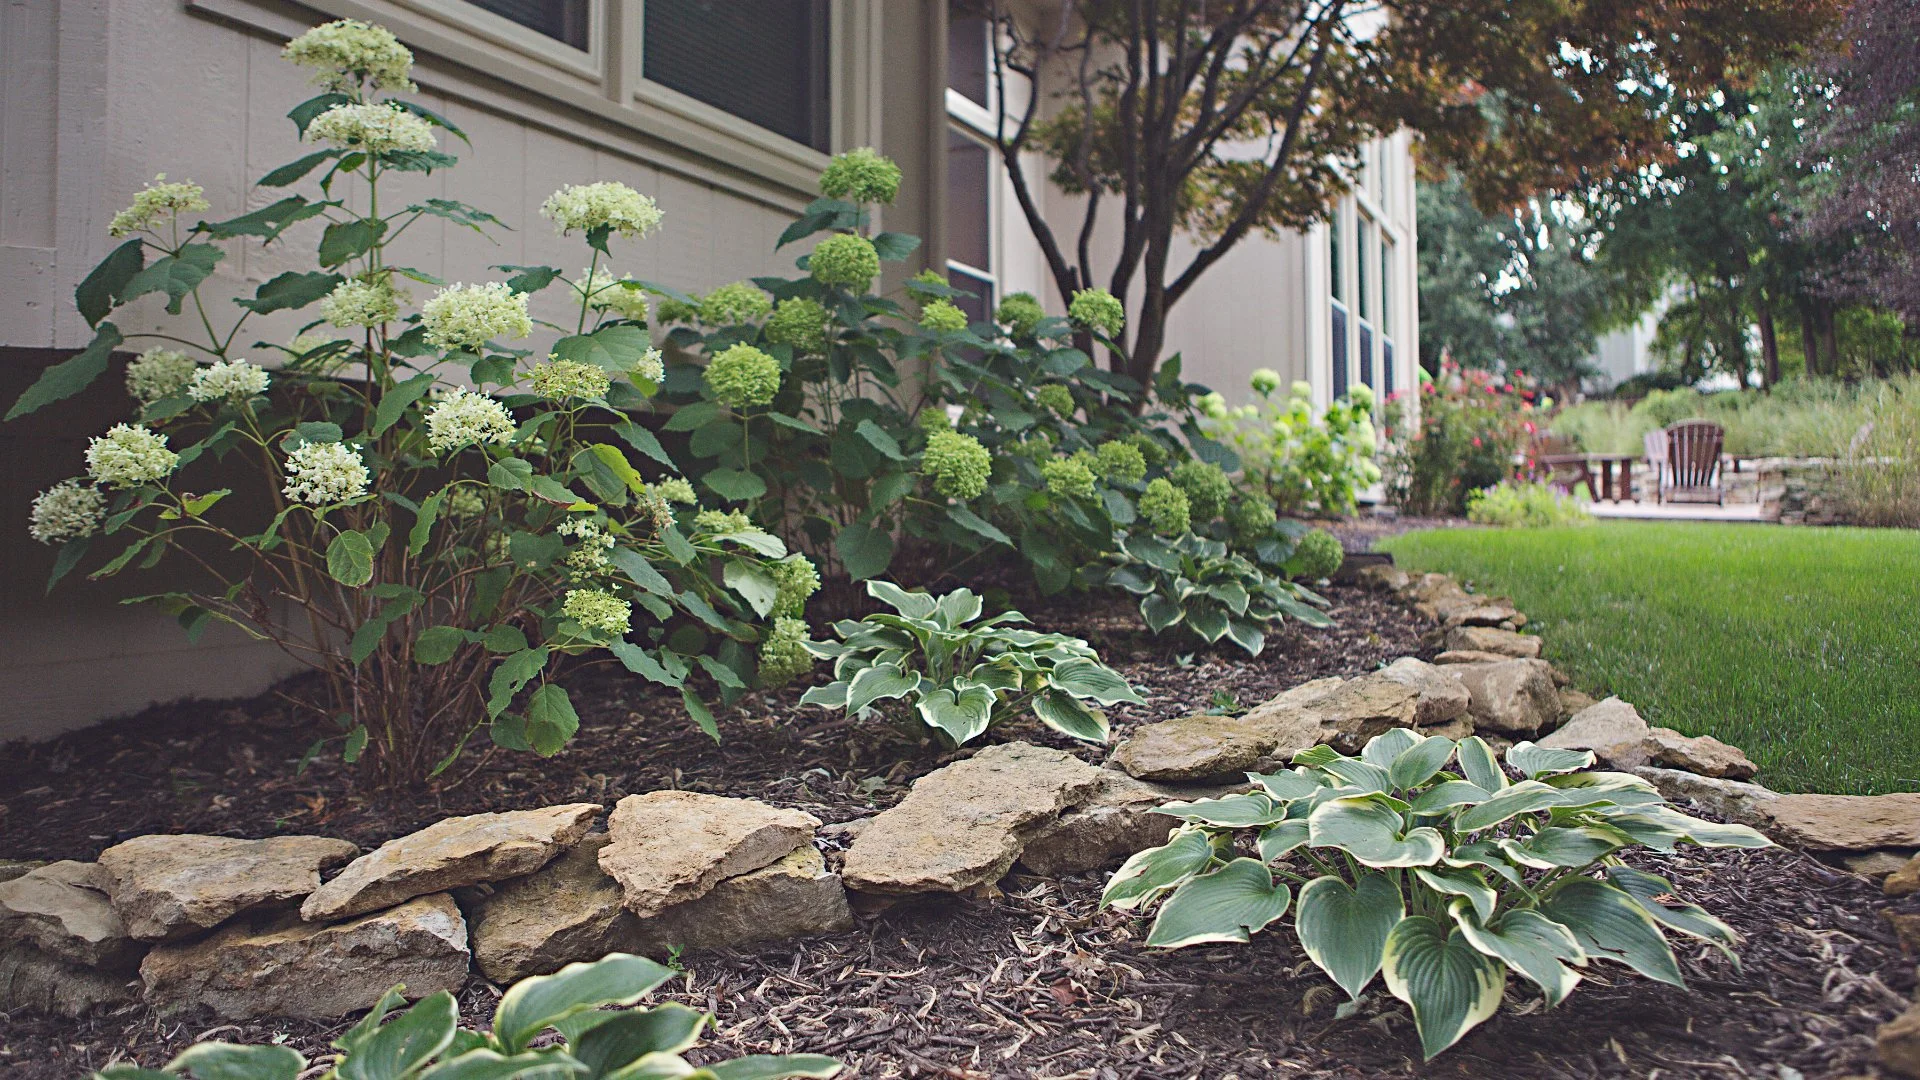 Your Mulch Ground Cover Should Be the Proper Thickness to Benefit Your Plants!